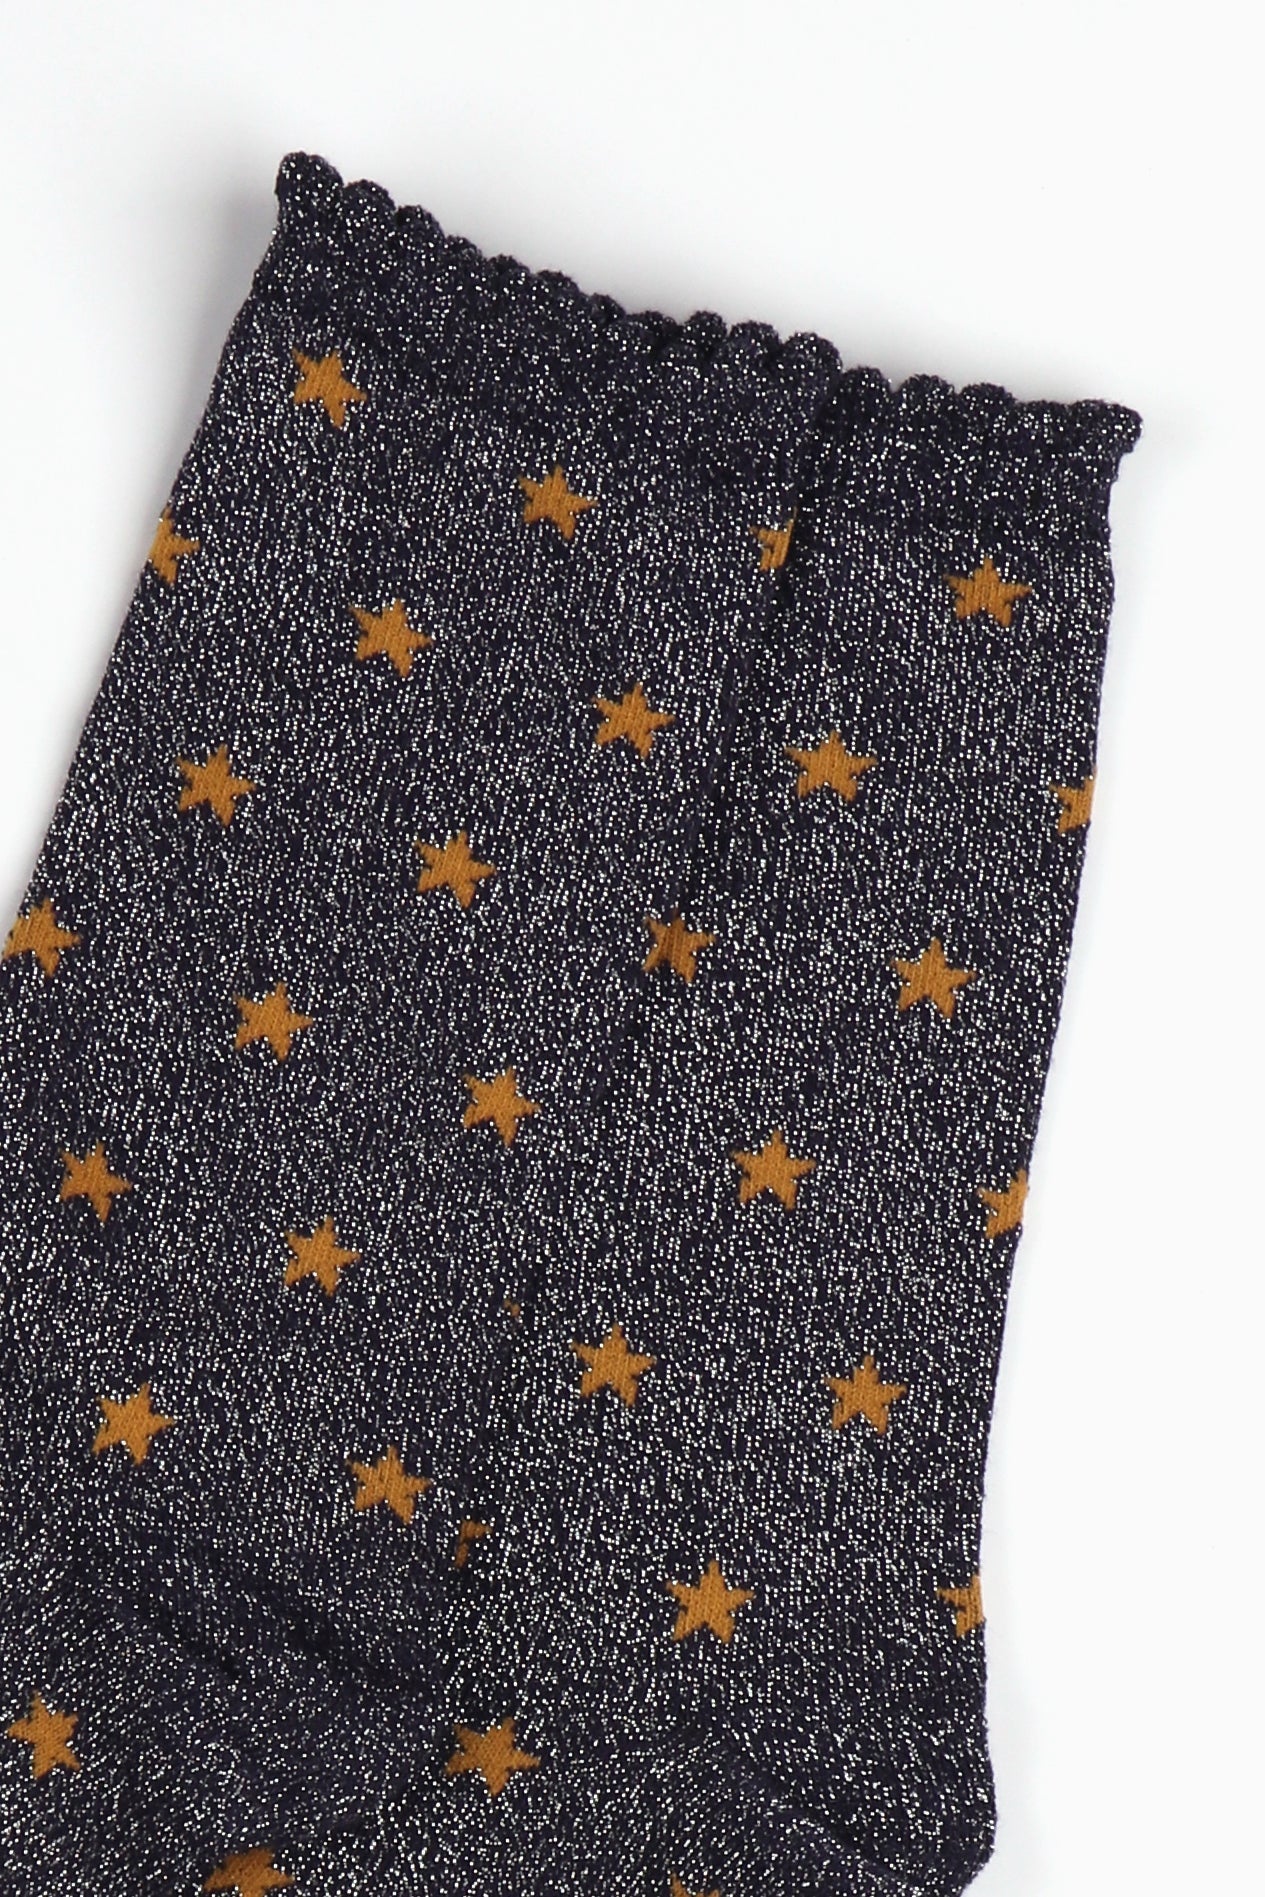 navy blue sparkly ankle socks with an all over silver glitter shimmer and an all over orange star print pattern